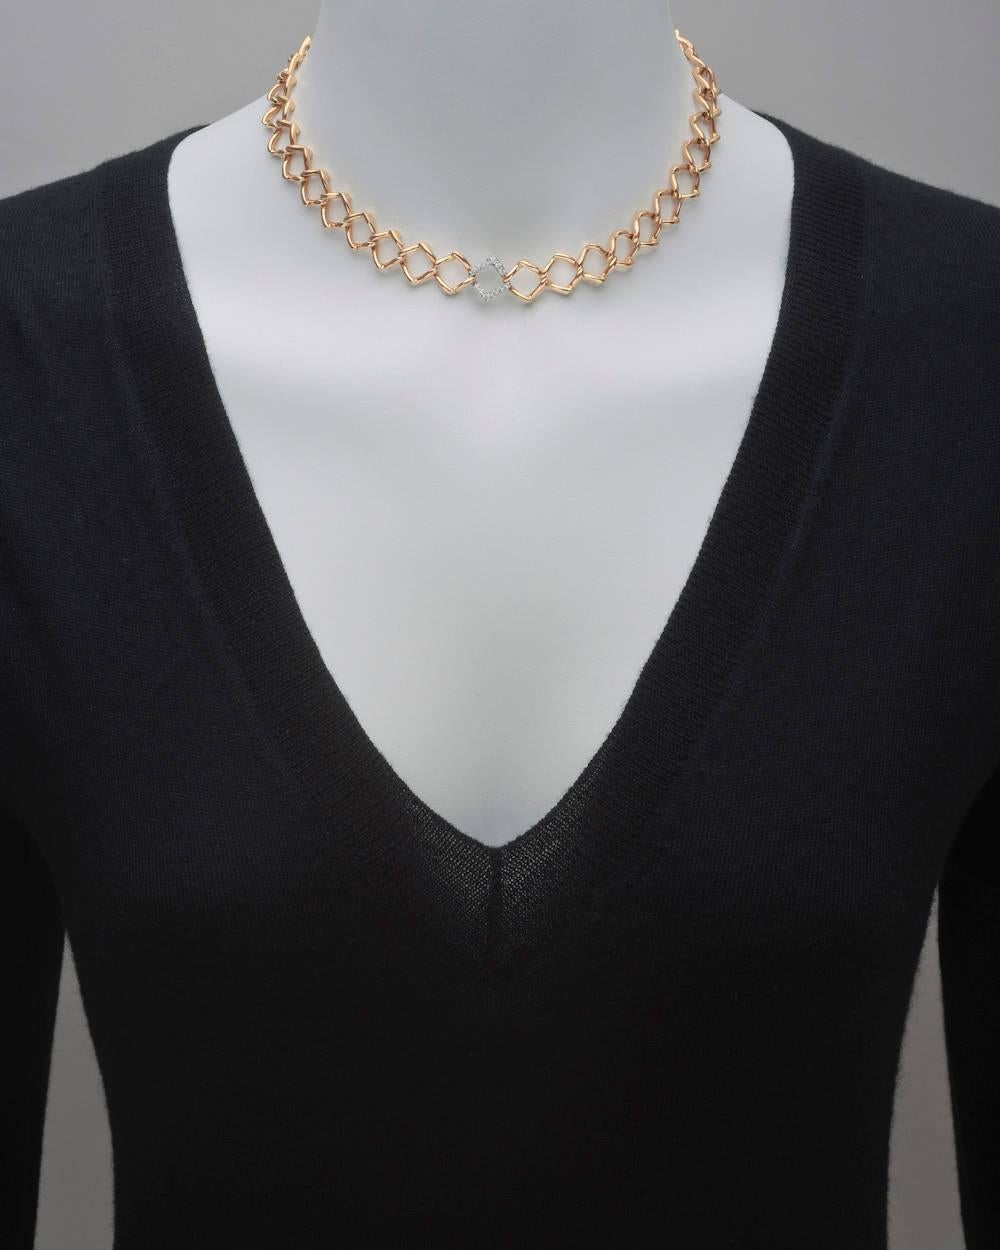 Open square-shaped link collar necklace in 18k pink gold, centering a single diamond-set link in platinum, secured by a box clasp, dated 1981, signed Paloma Picasso for Tiffany & Co. Twelve round diamonds weighing approximately 0.24 total carats